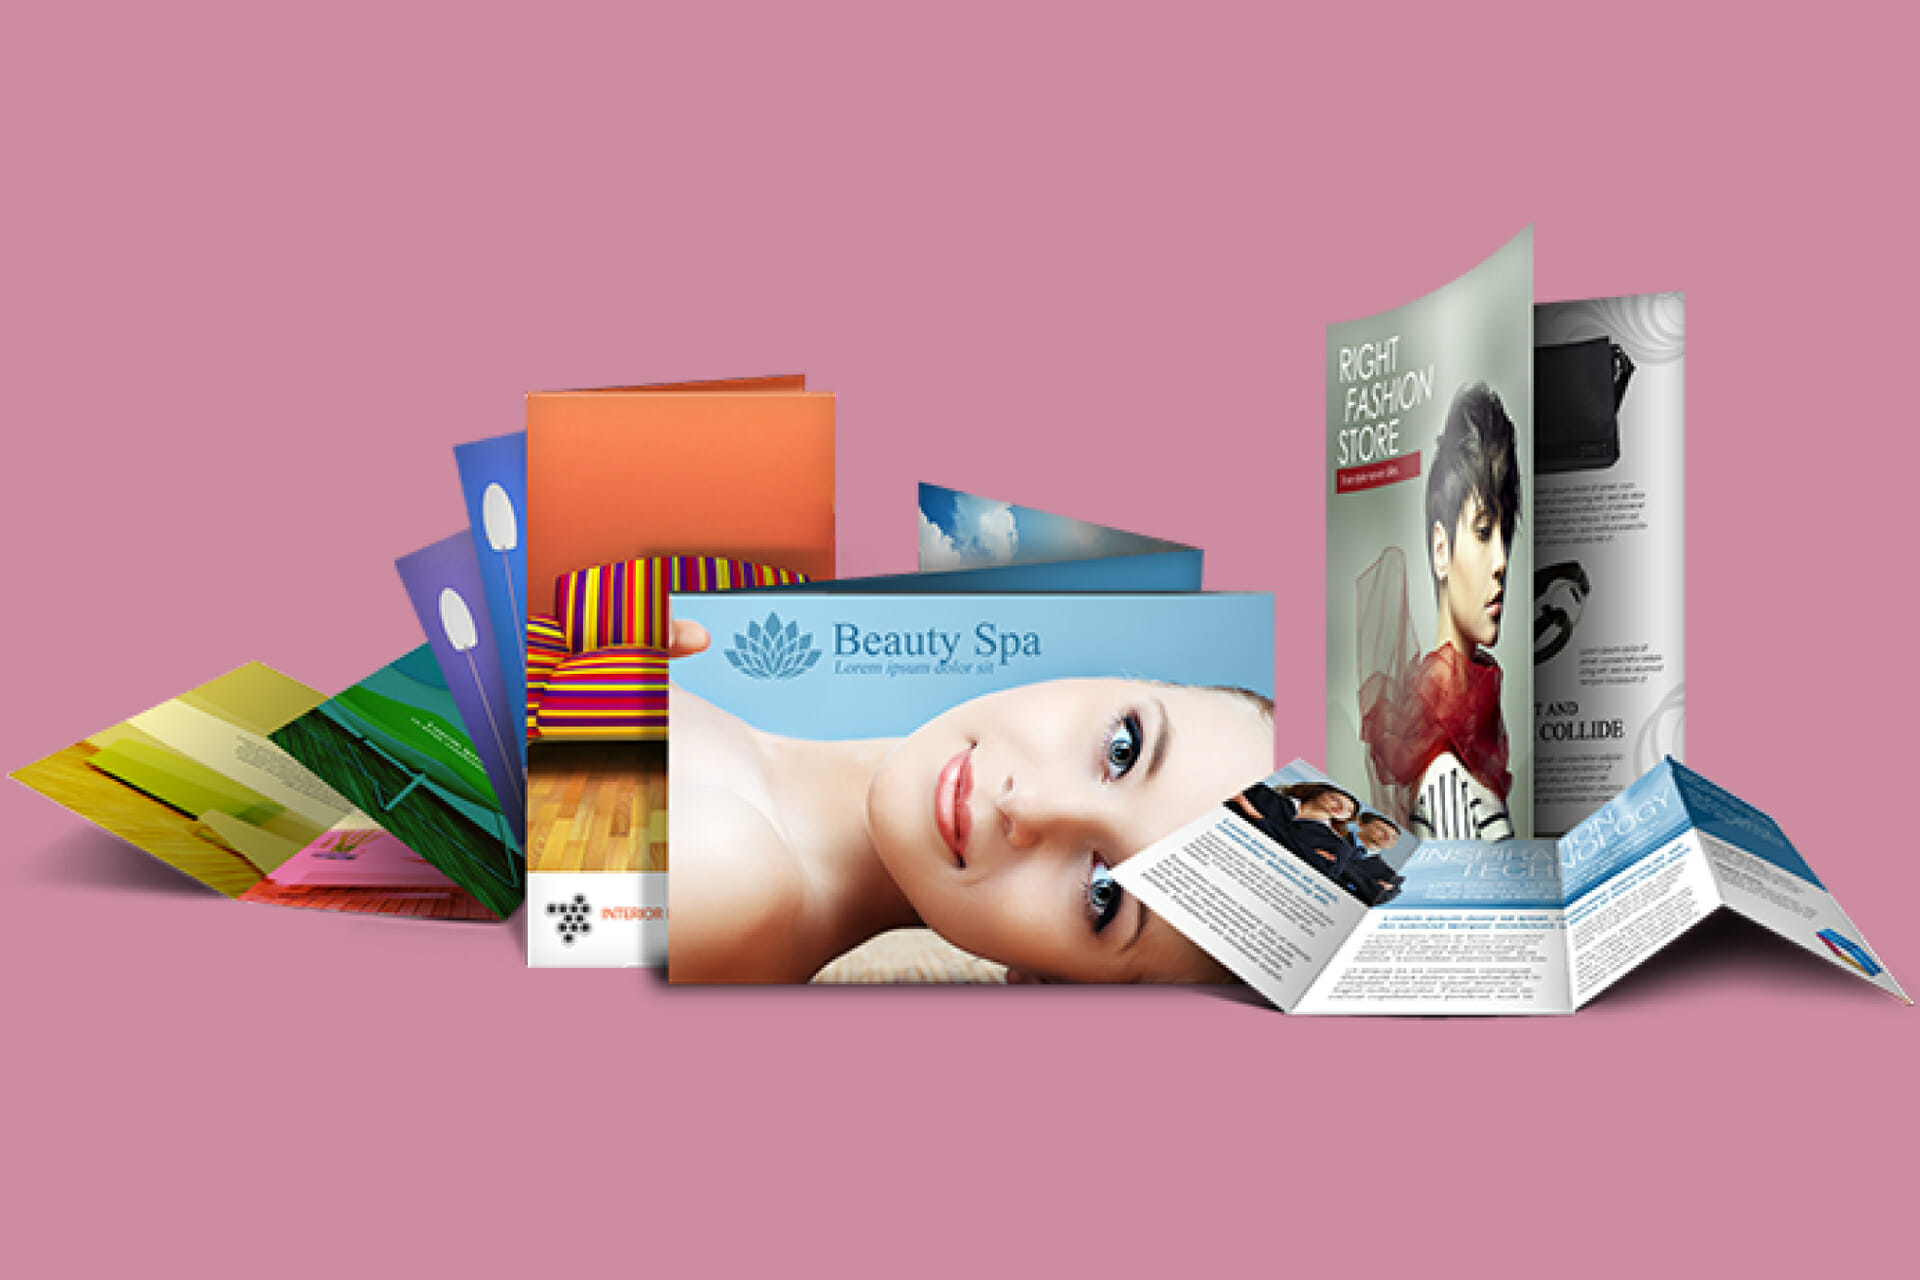 What are the best printers for business cards, flyers and brochures